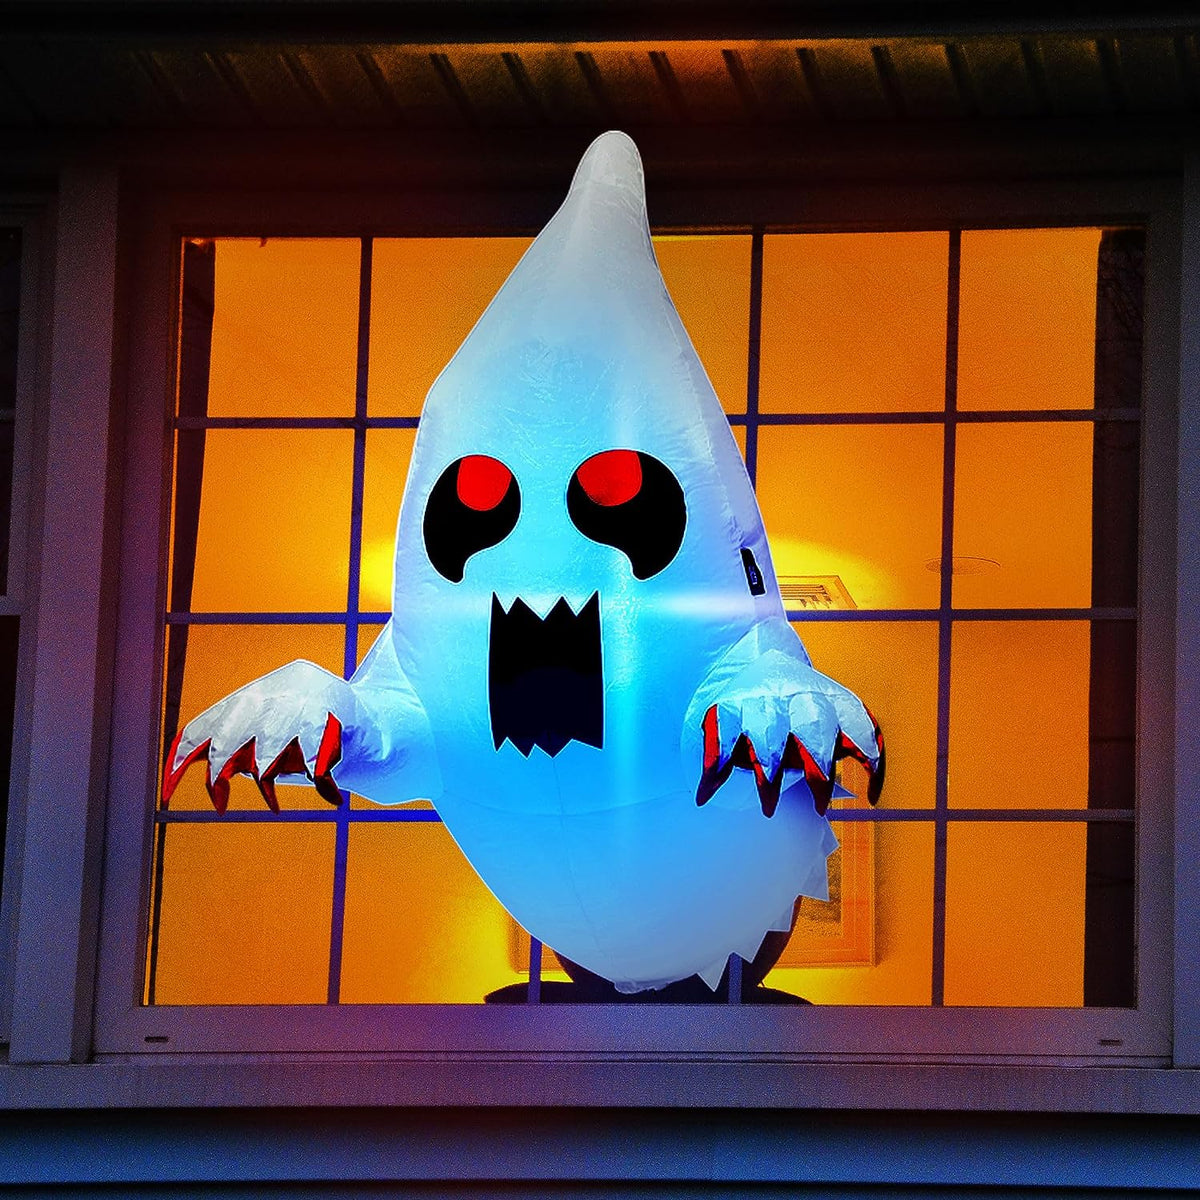 VIVOHOME 3.5ft Halloween Inflatable Ghost with Colorful Lights